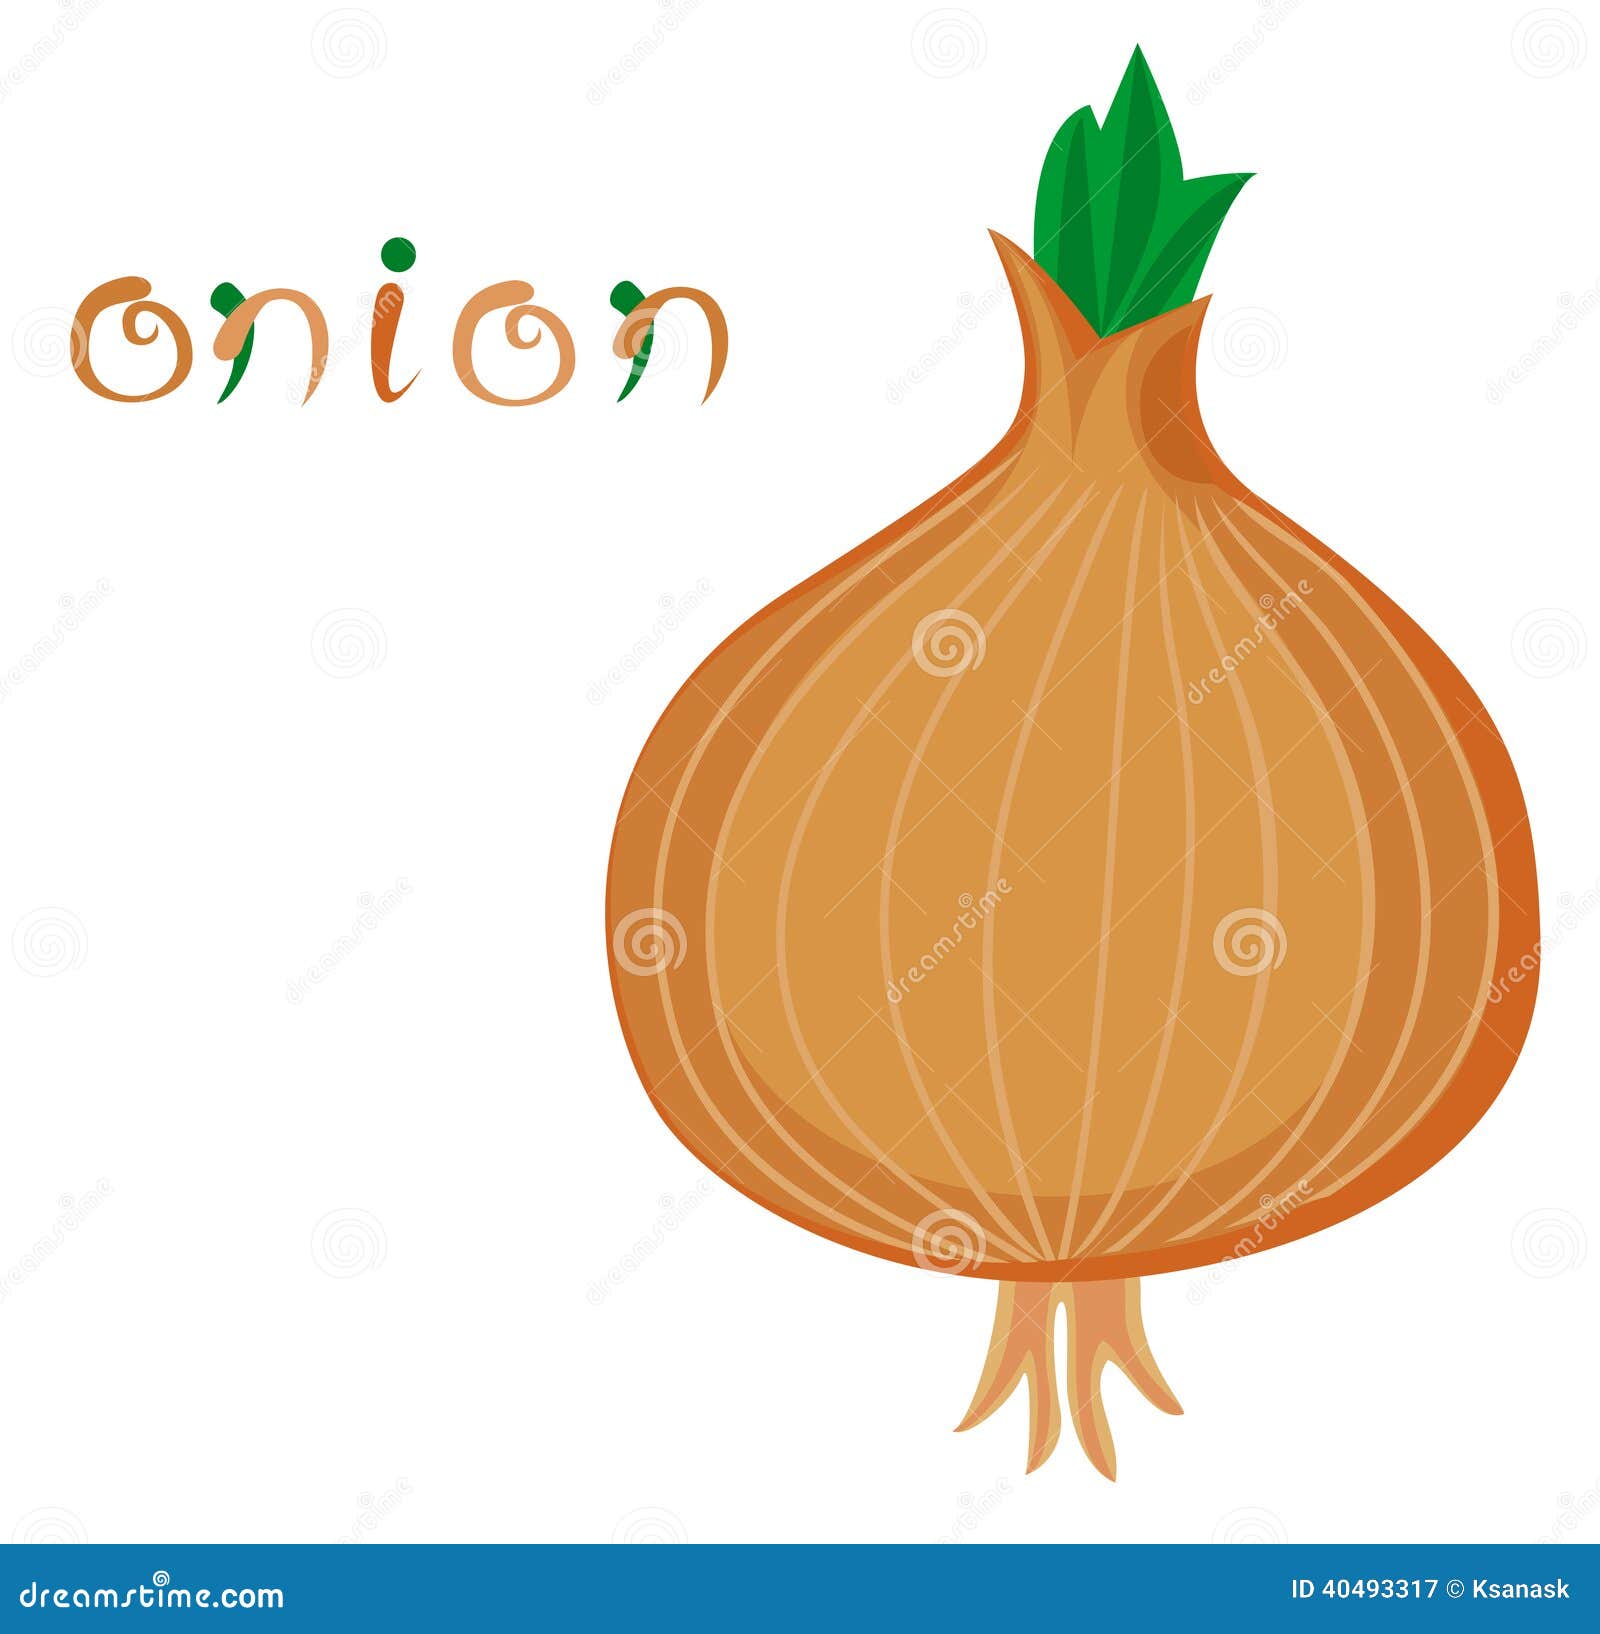 clipart of onion - photo #29